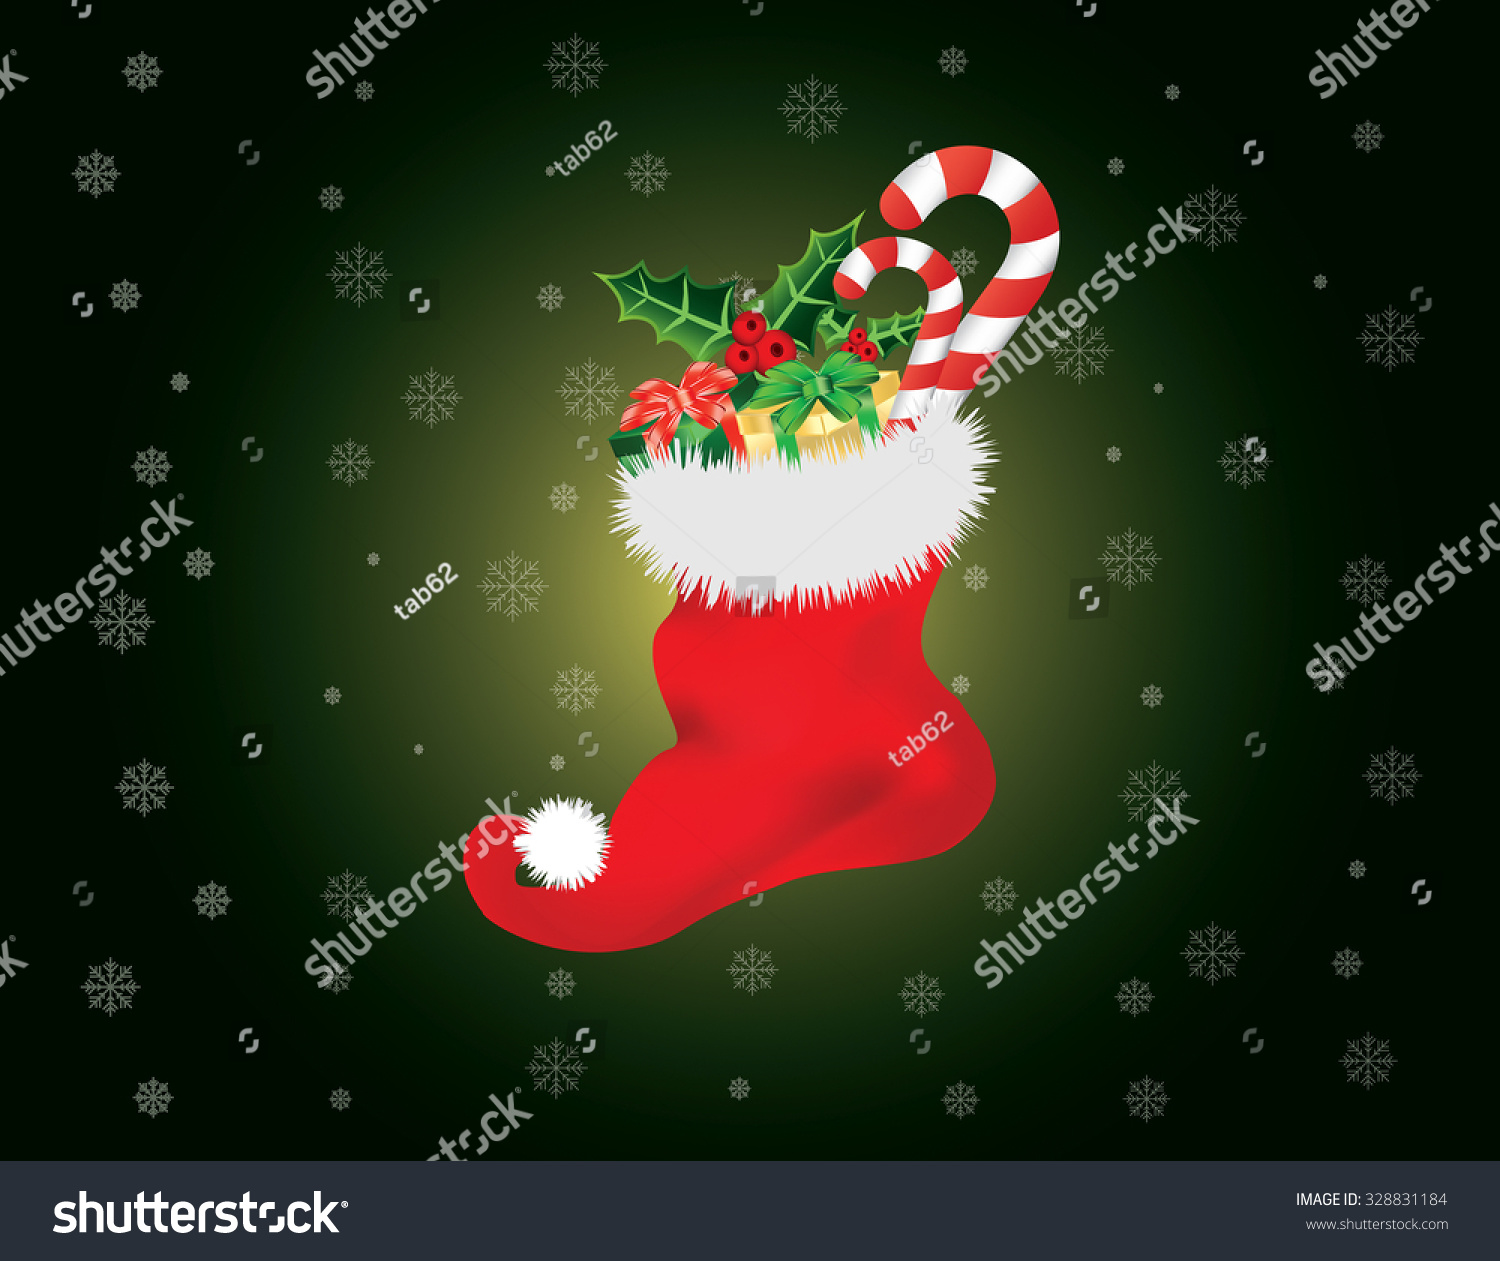 Christmas Stocking Filled With Candy / Amazon Com Holiday Christmas ...